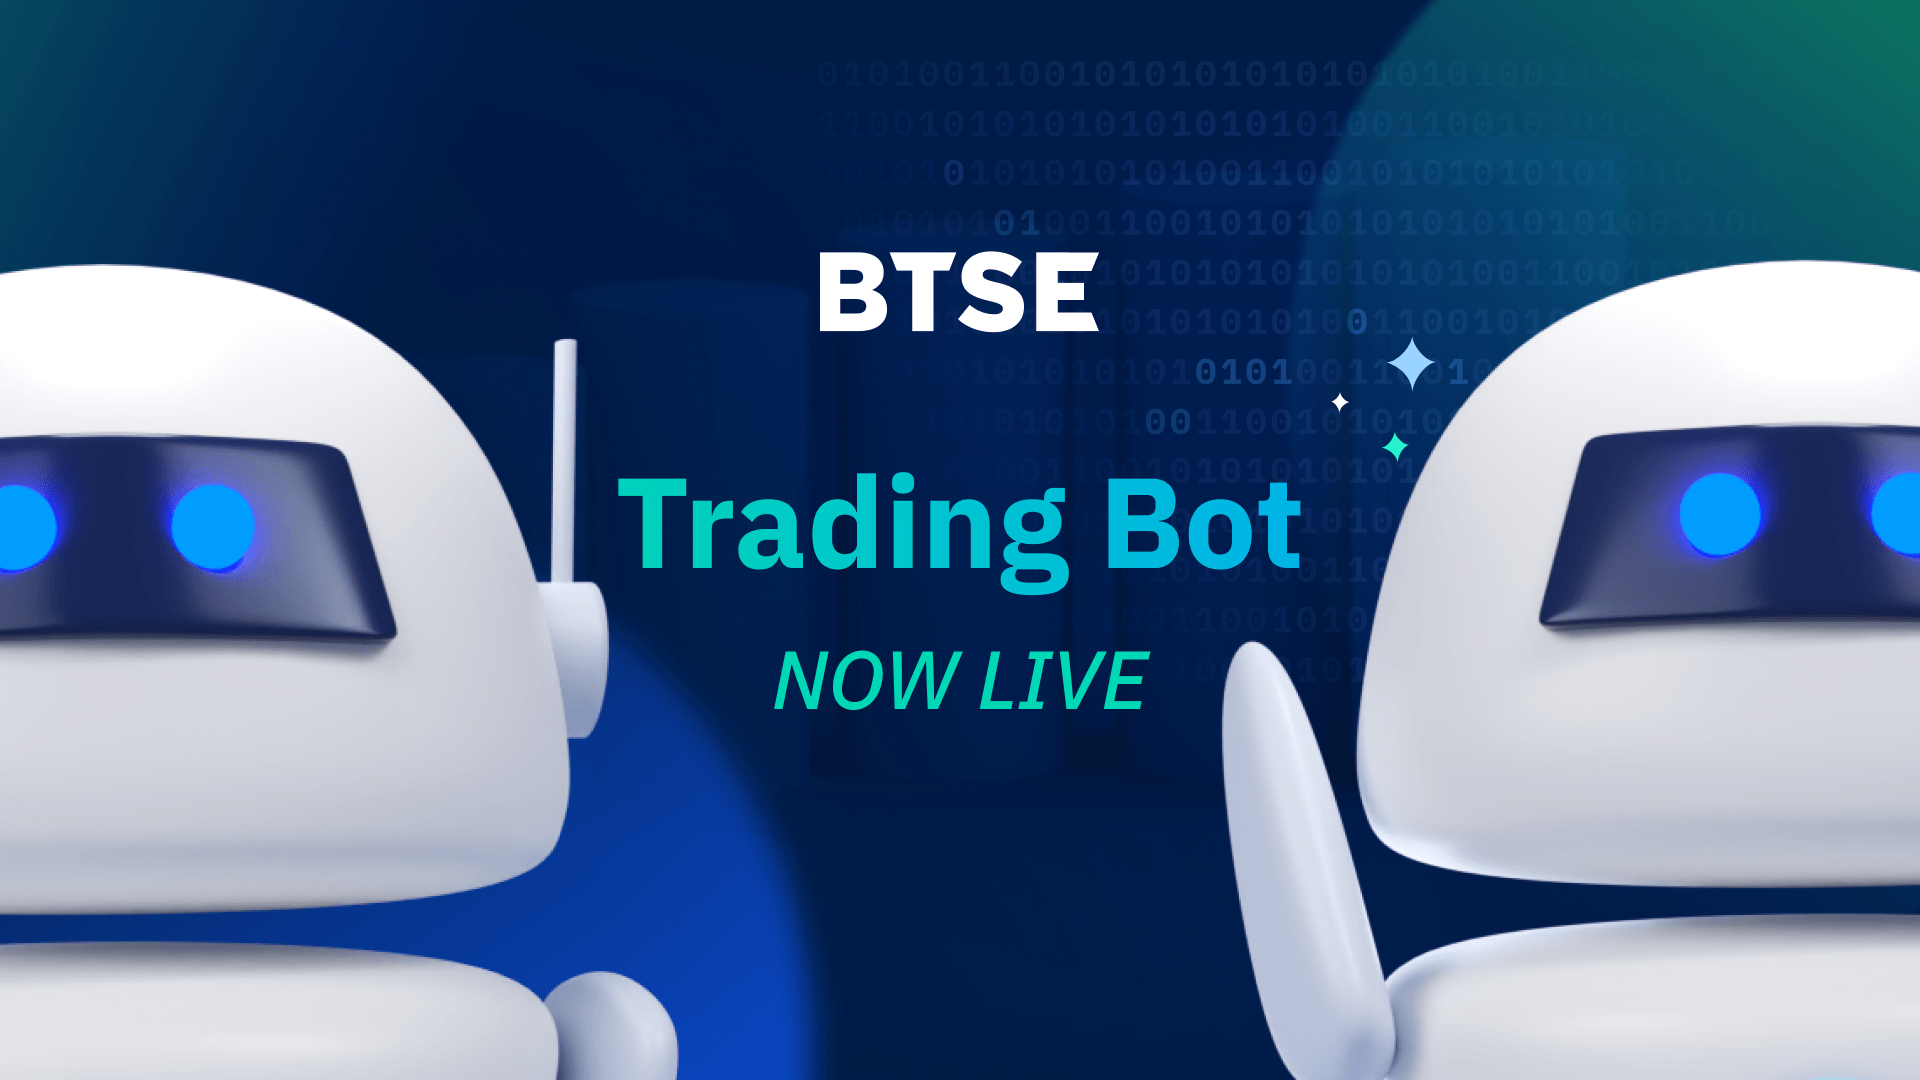 Automate Your Trades with BTSE’s New Trading Bot Feature